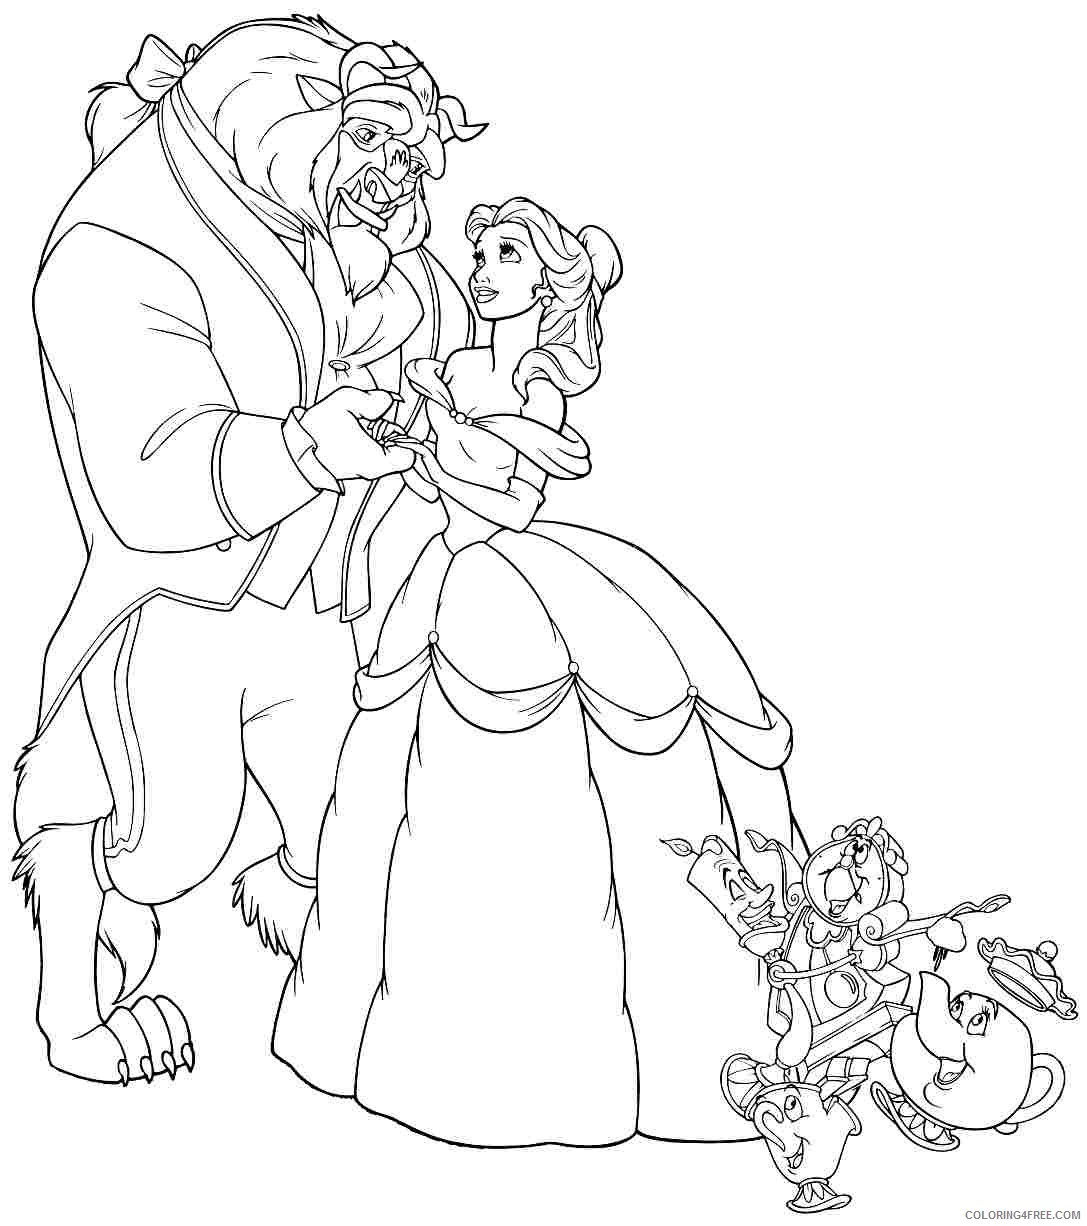 Beauty and the Beast Coloring Pages Cartoons Beauty and the Beast Pictures to Printable 2020 1155 Coloring4free